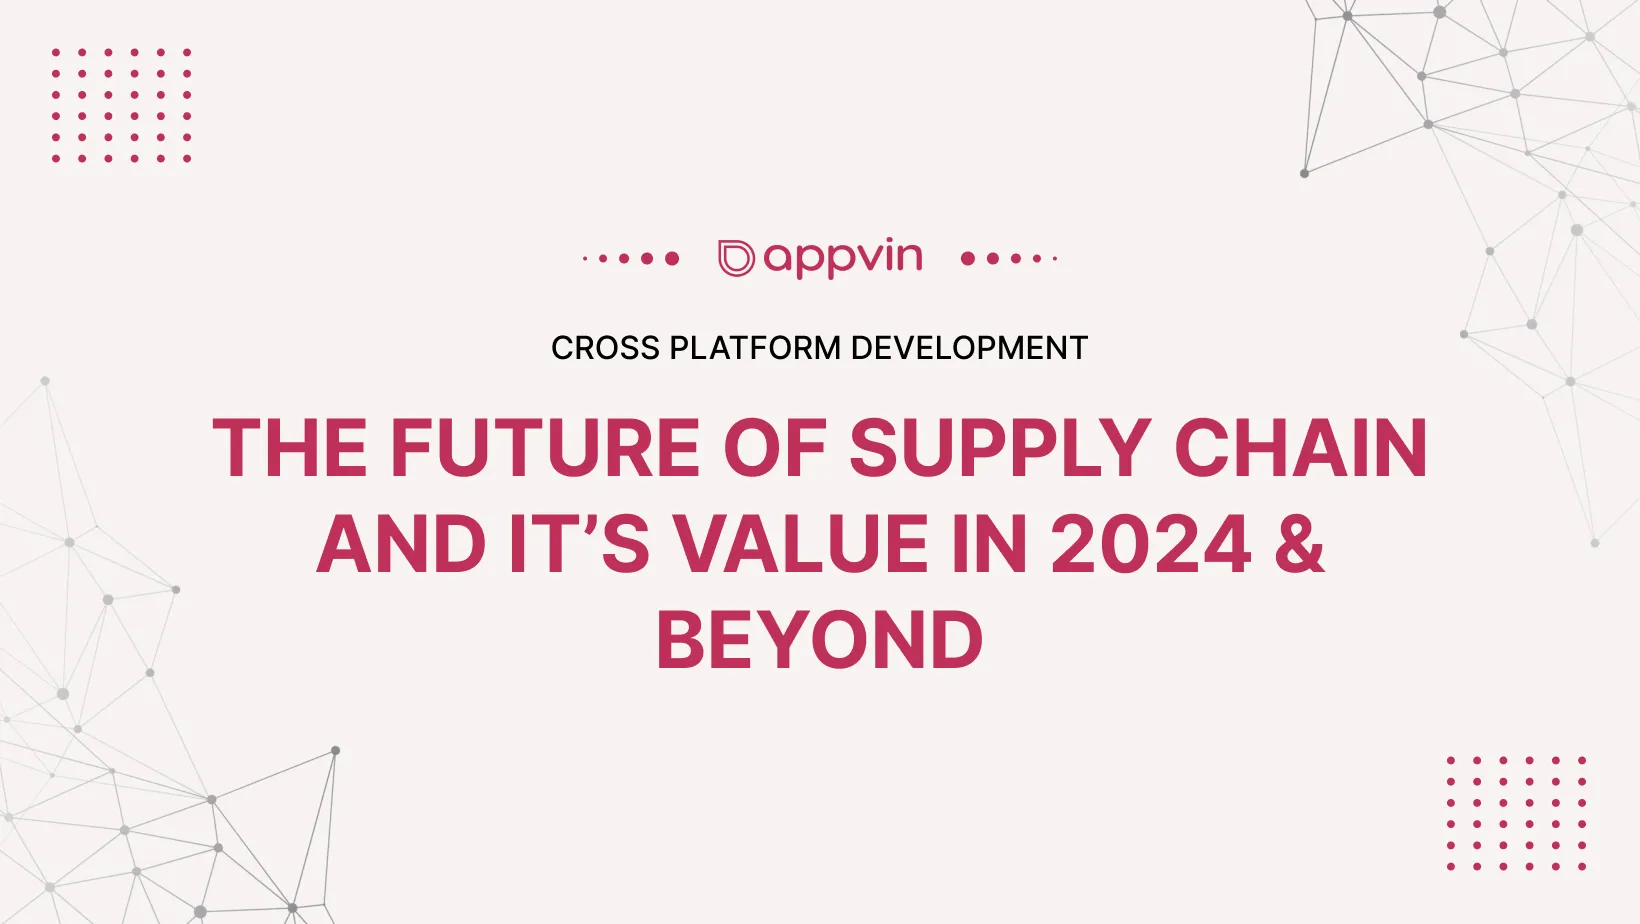 The Future of Supply Chain and it’s Value in 2024 & Beyond